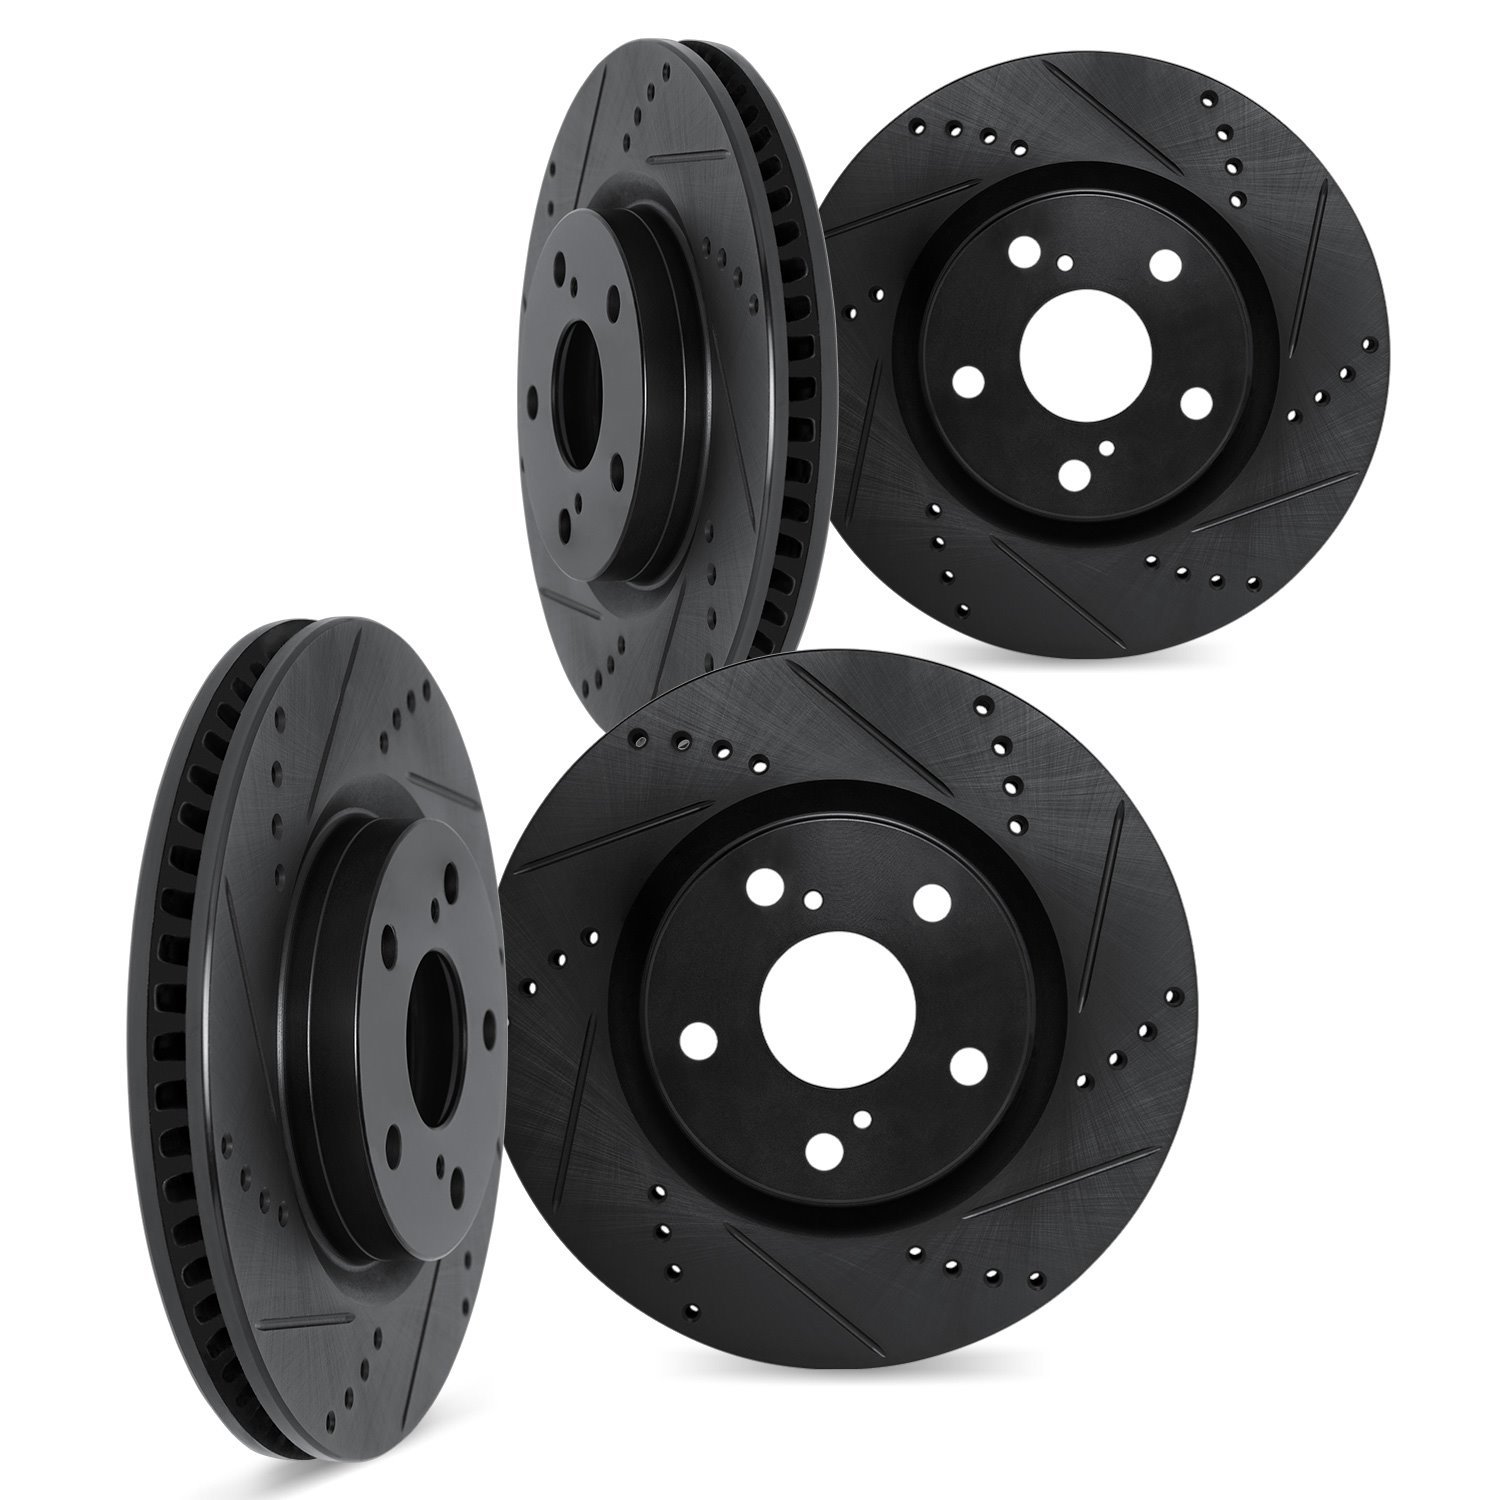 8004-75009 Drilled/Slotted Brake Rotors [Black], 2006-2015 Lexus/Toyota/Scion, Position: Front and Rear